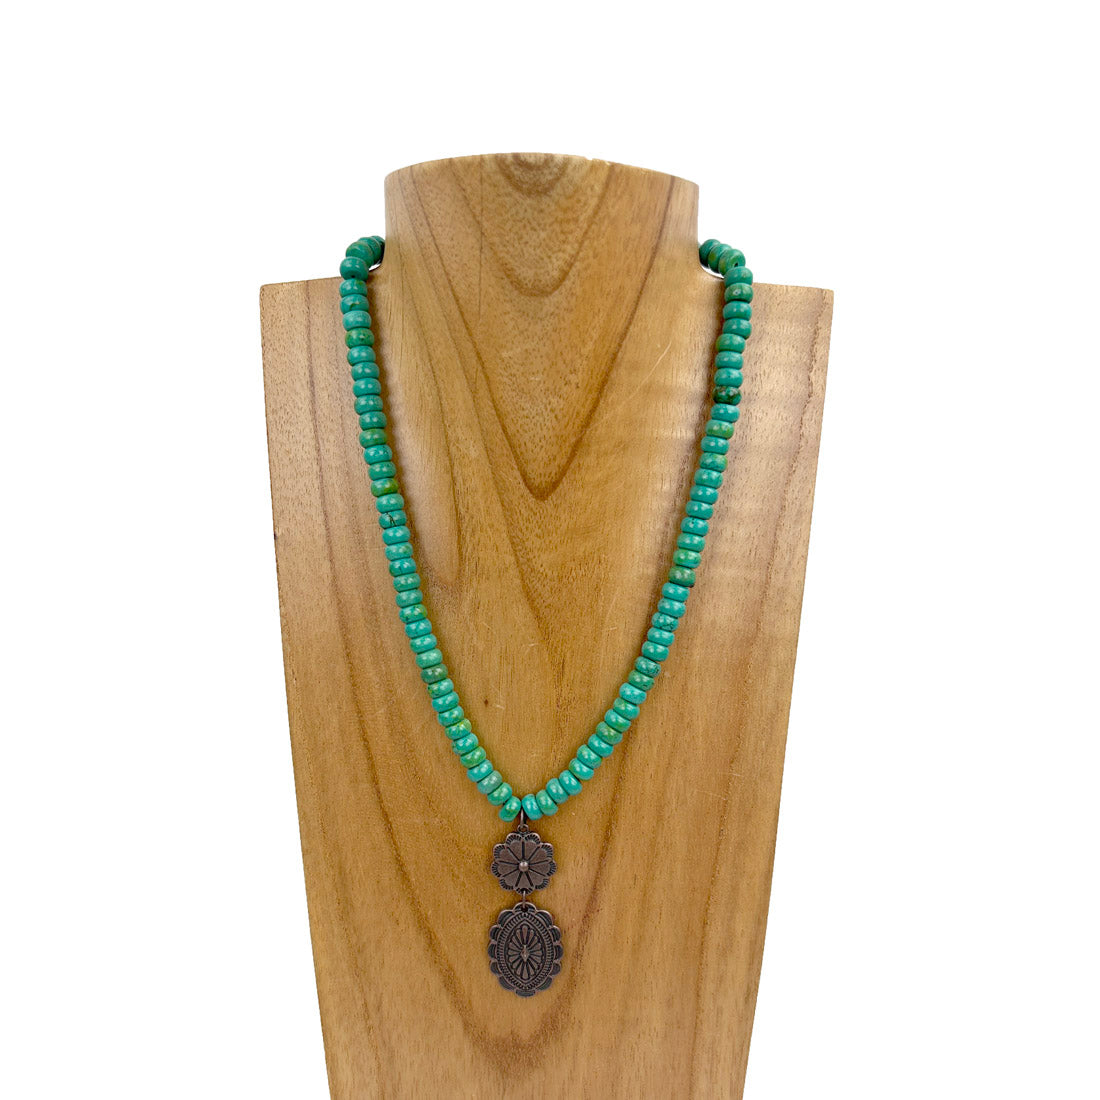 NKZ230930-42         17 inches roundel green turquoise stone beads with copper metal concho Necklace